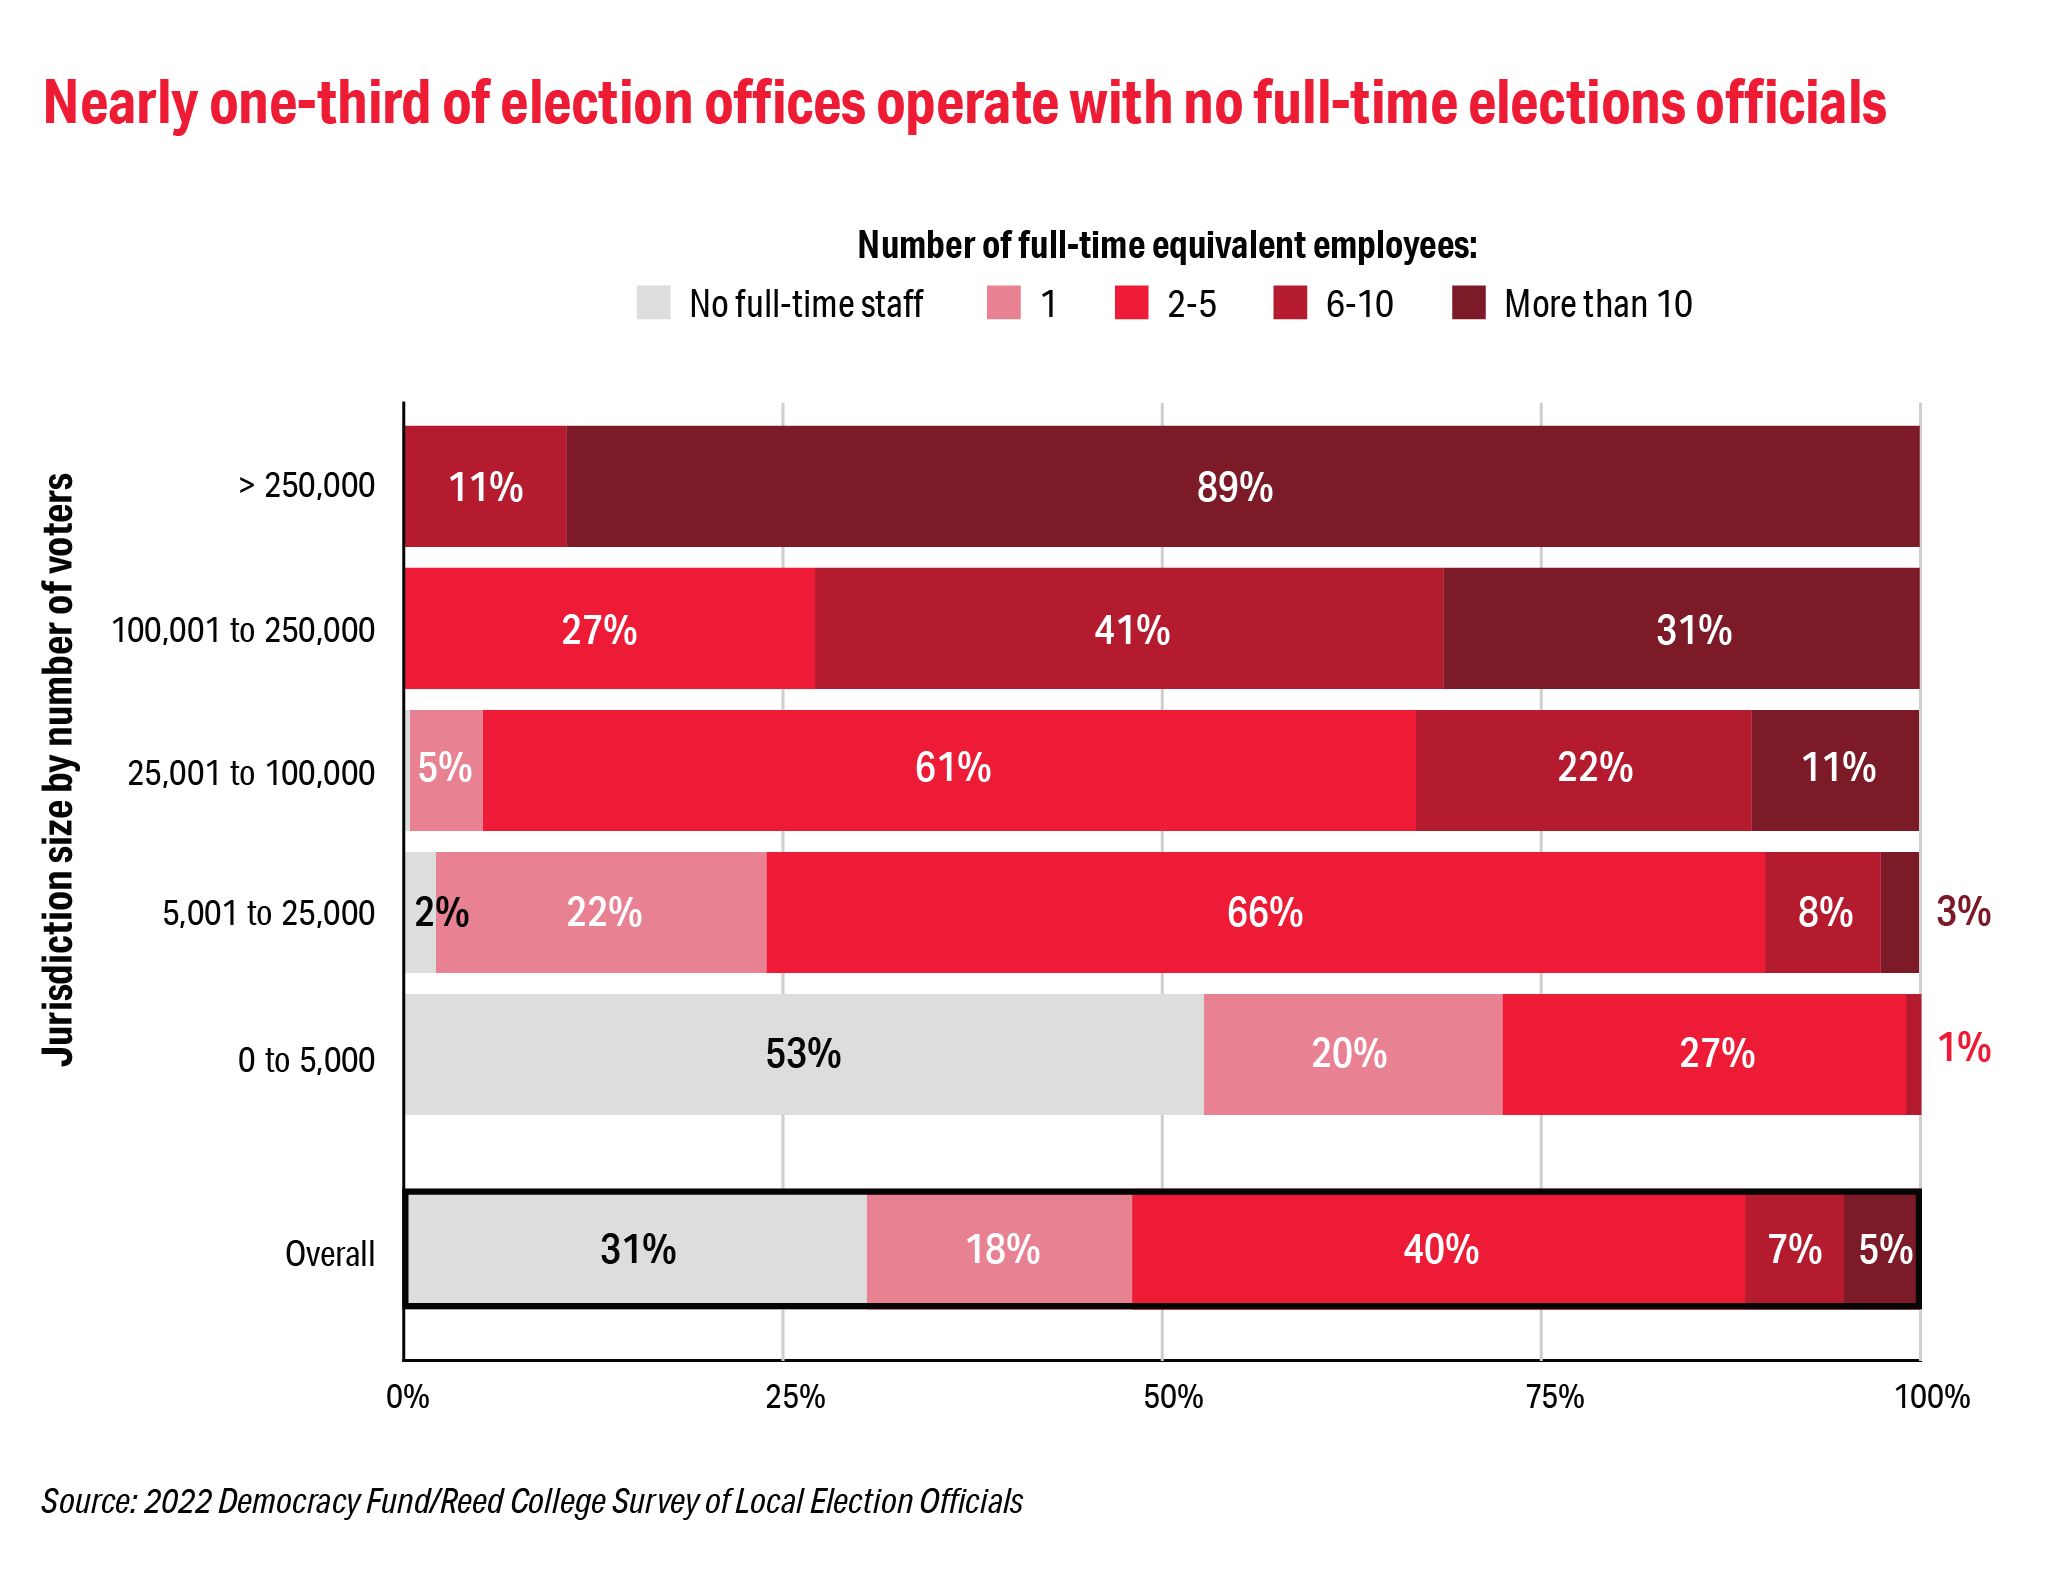 Graph of different jurisdiction sizes by number of voters showing that nearly one-third of election offices have no full-time elections officials.